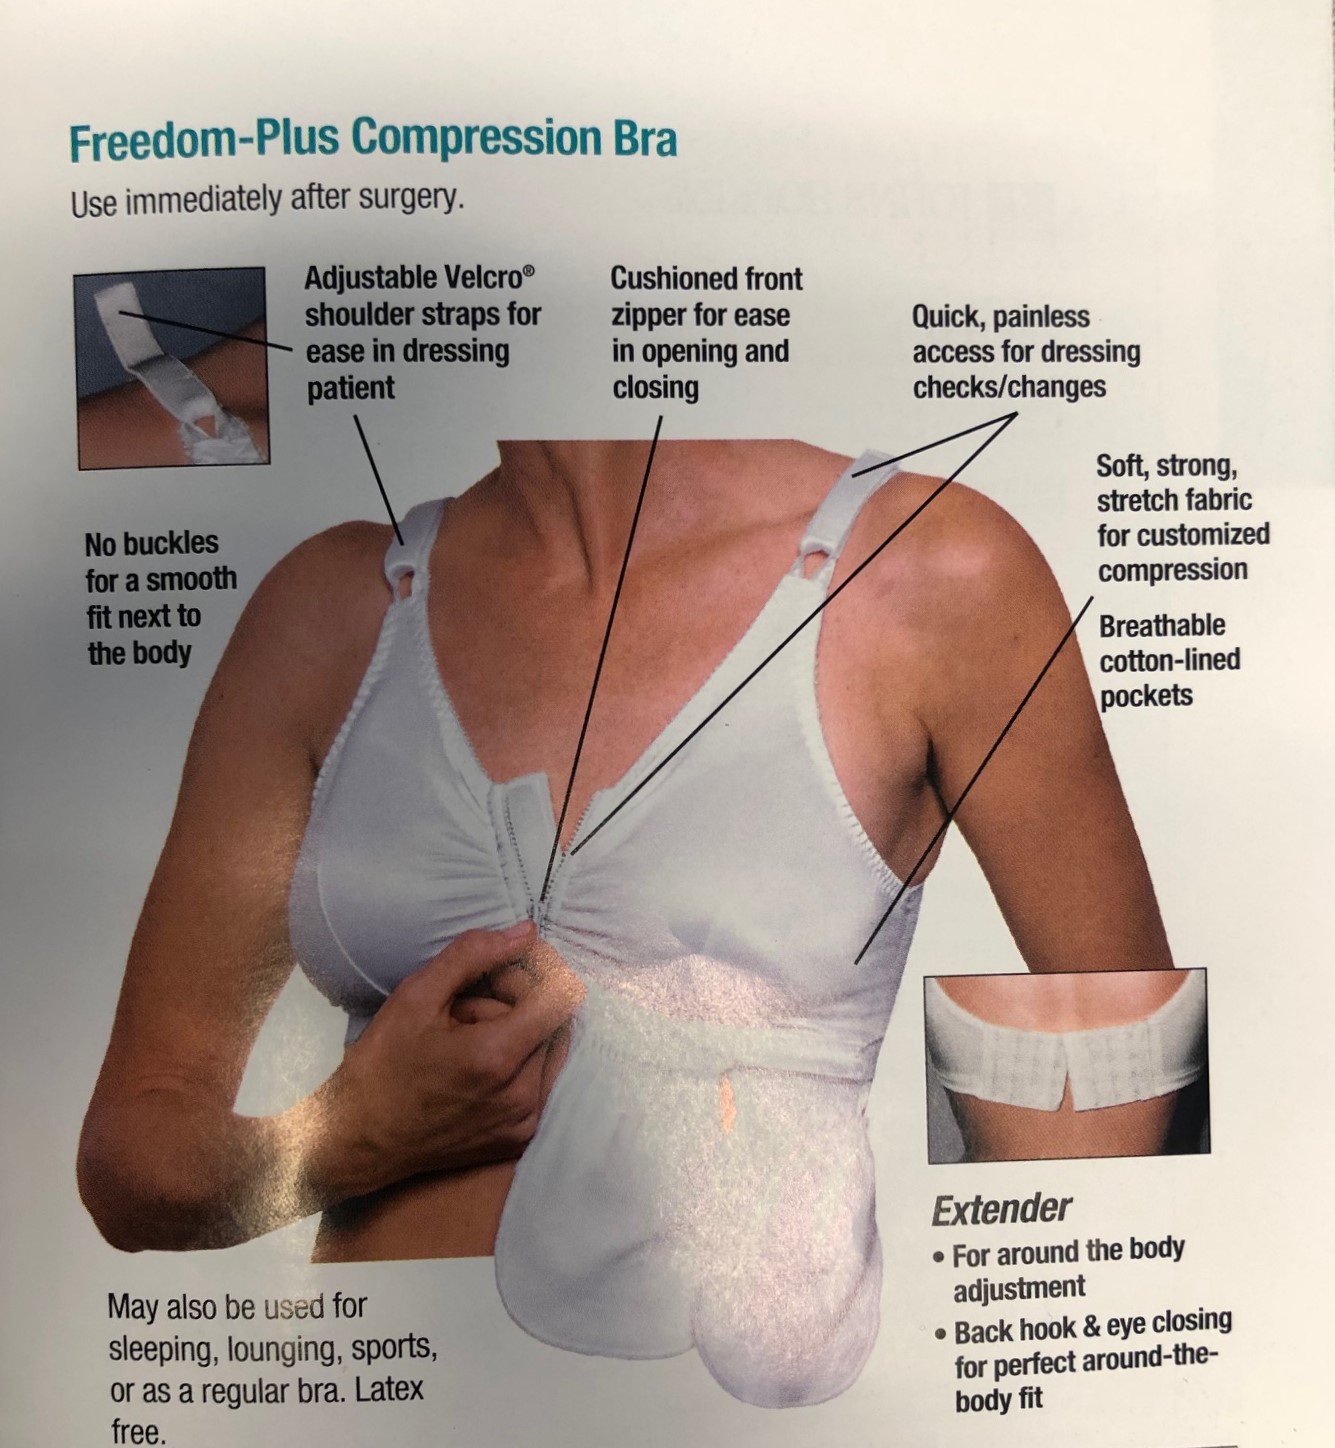 Compression Bra for Surgery, J. Phyllis Women's Specialties